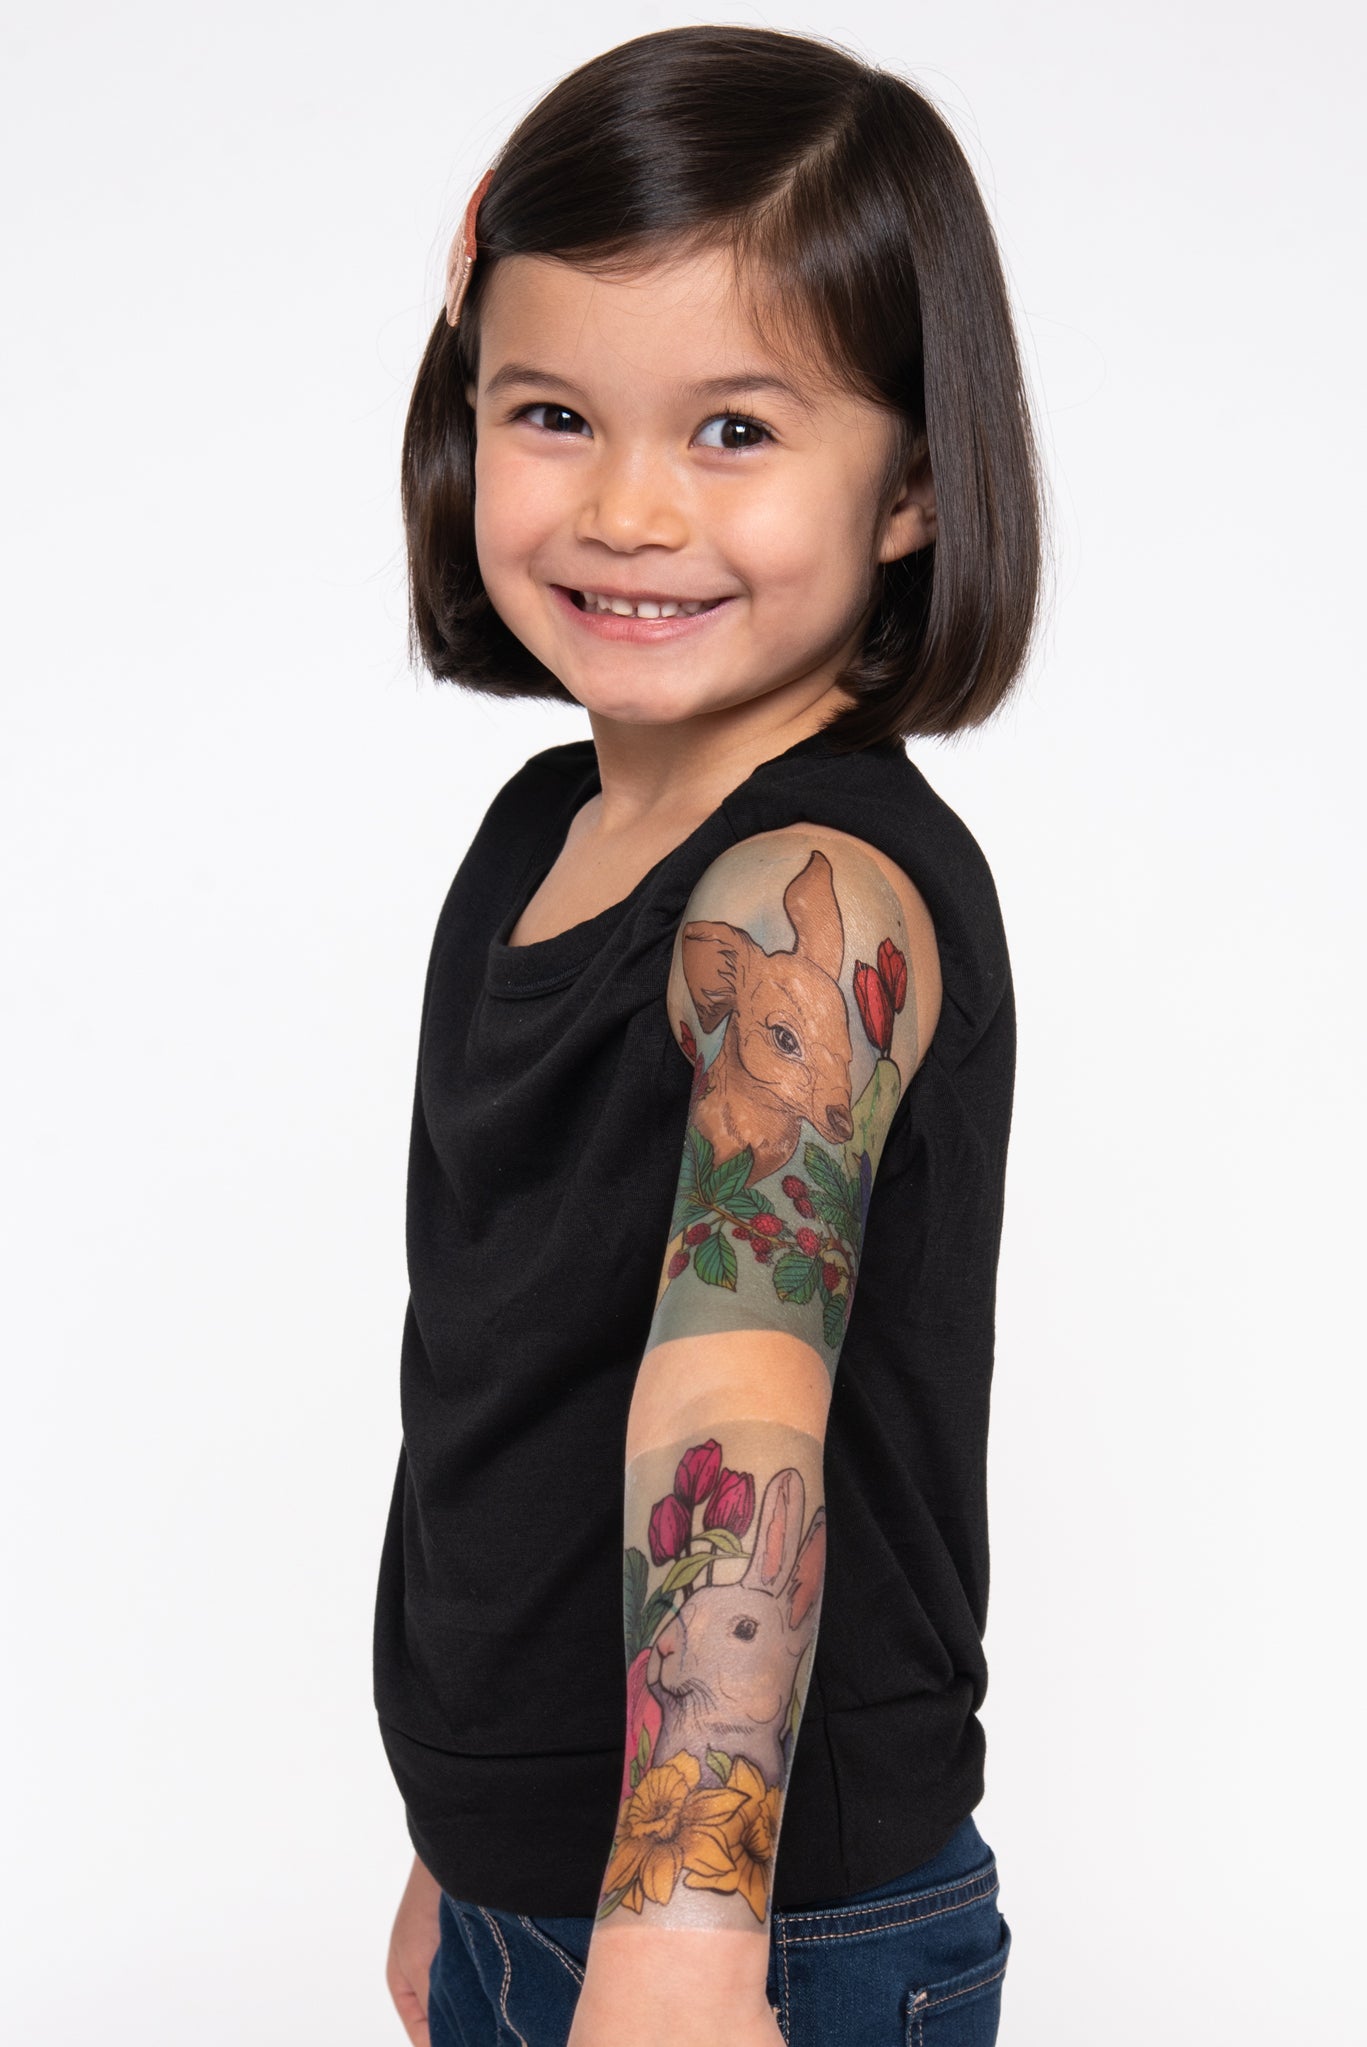 Details more than 129 little kid tattoos